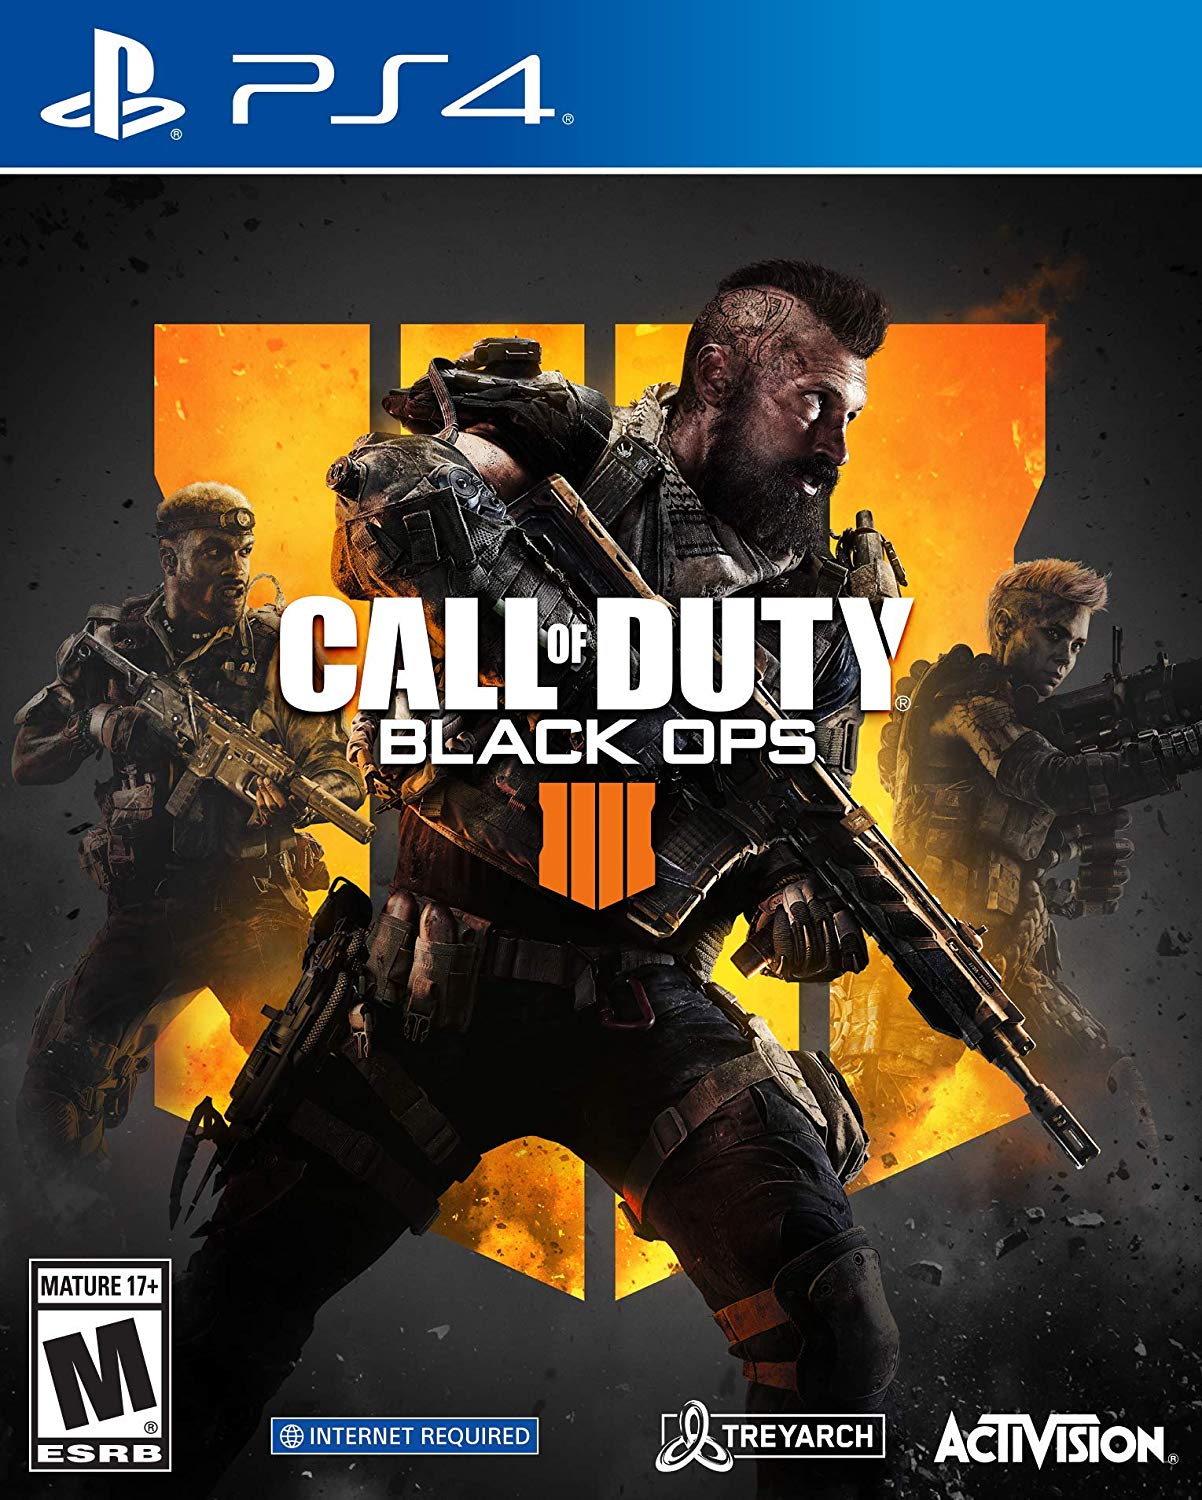 Call of Duty: Black Ops 4, Activision, PlayStation 4, 047875882256 - image 1 of 10